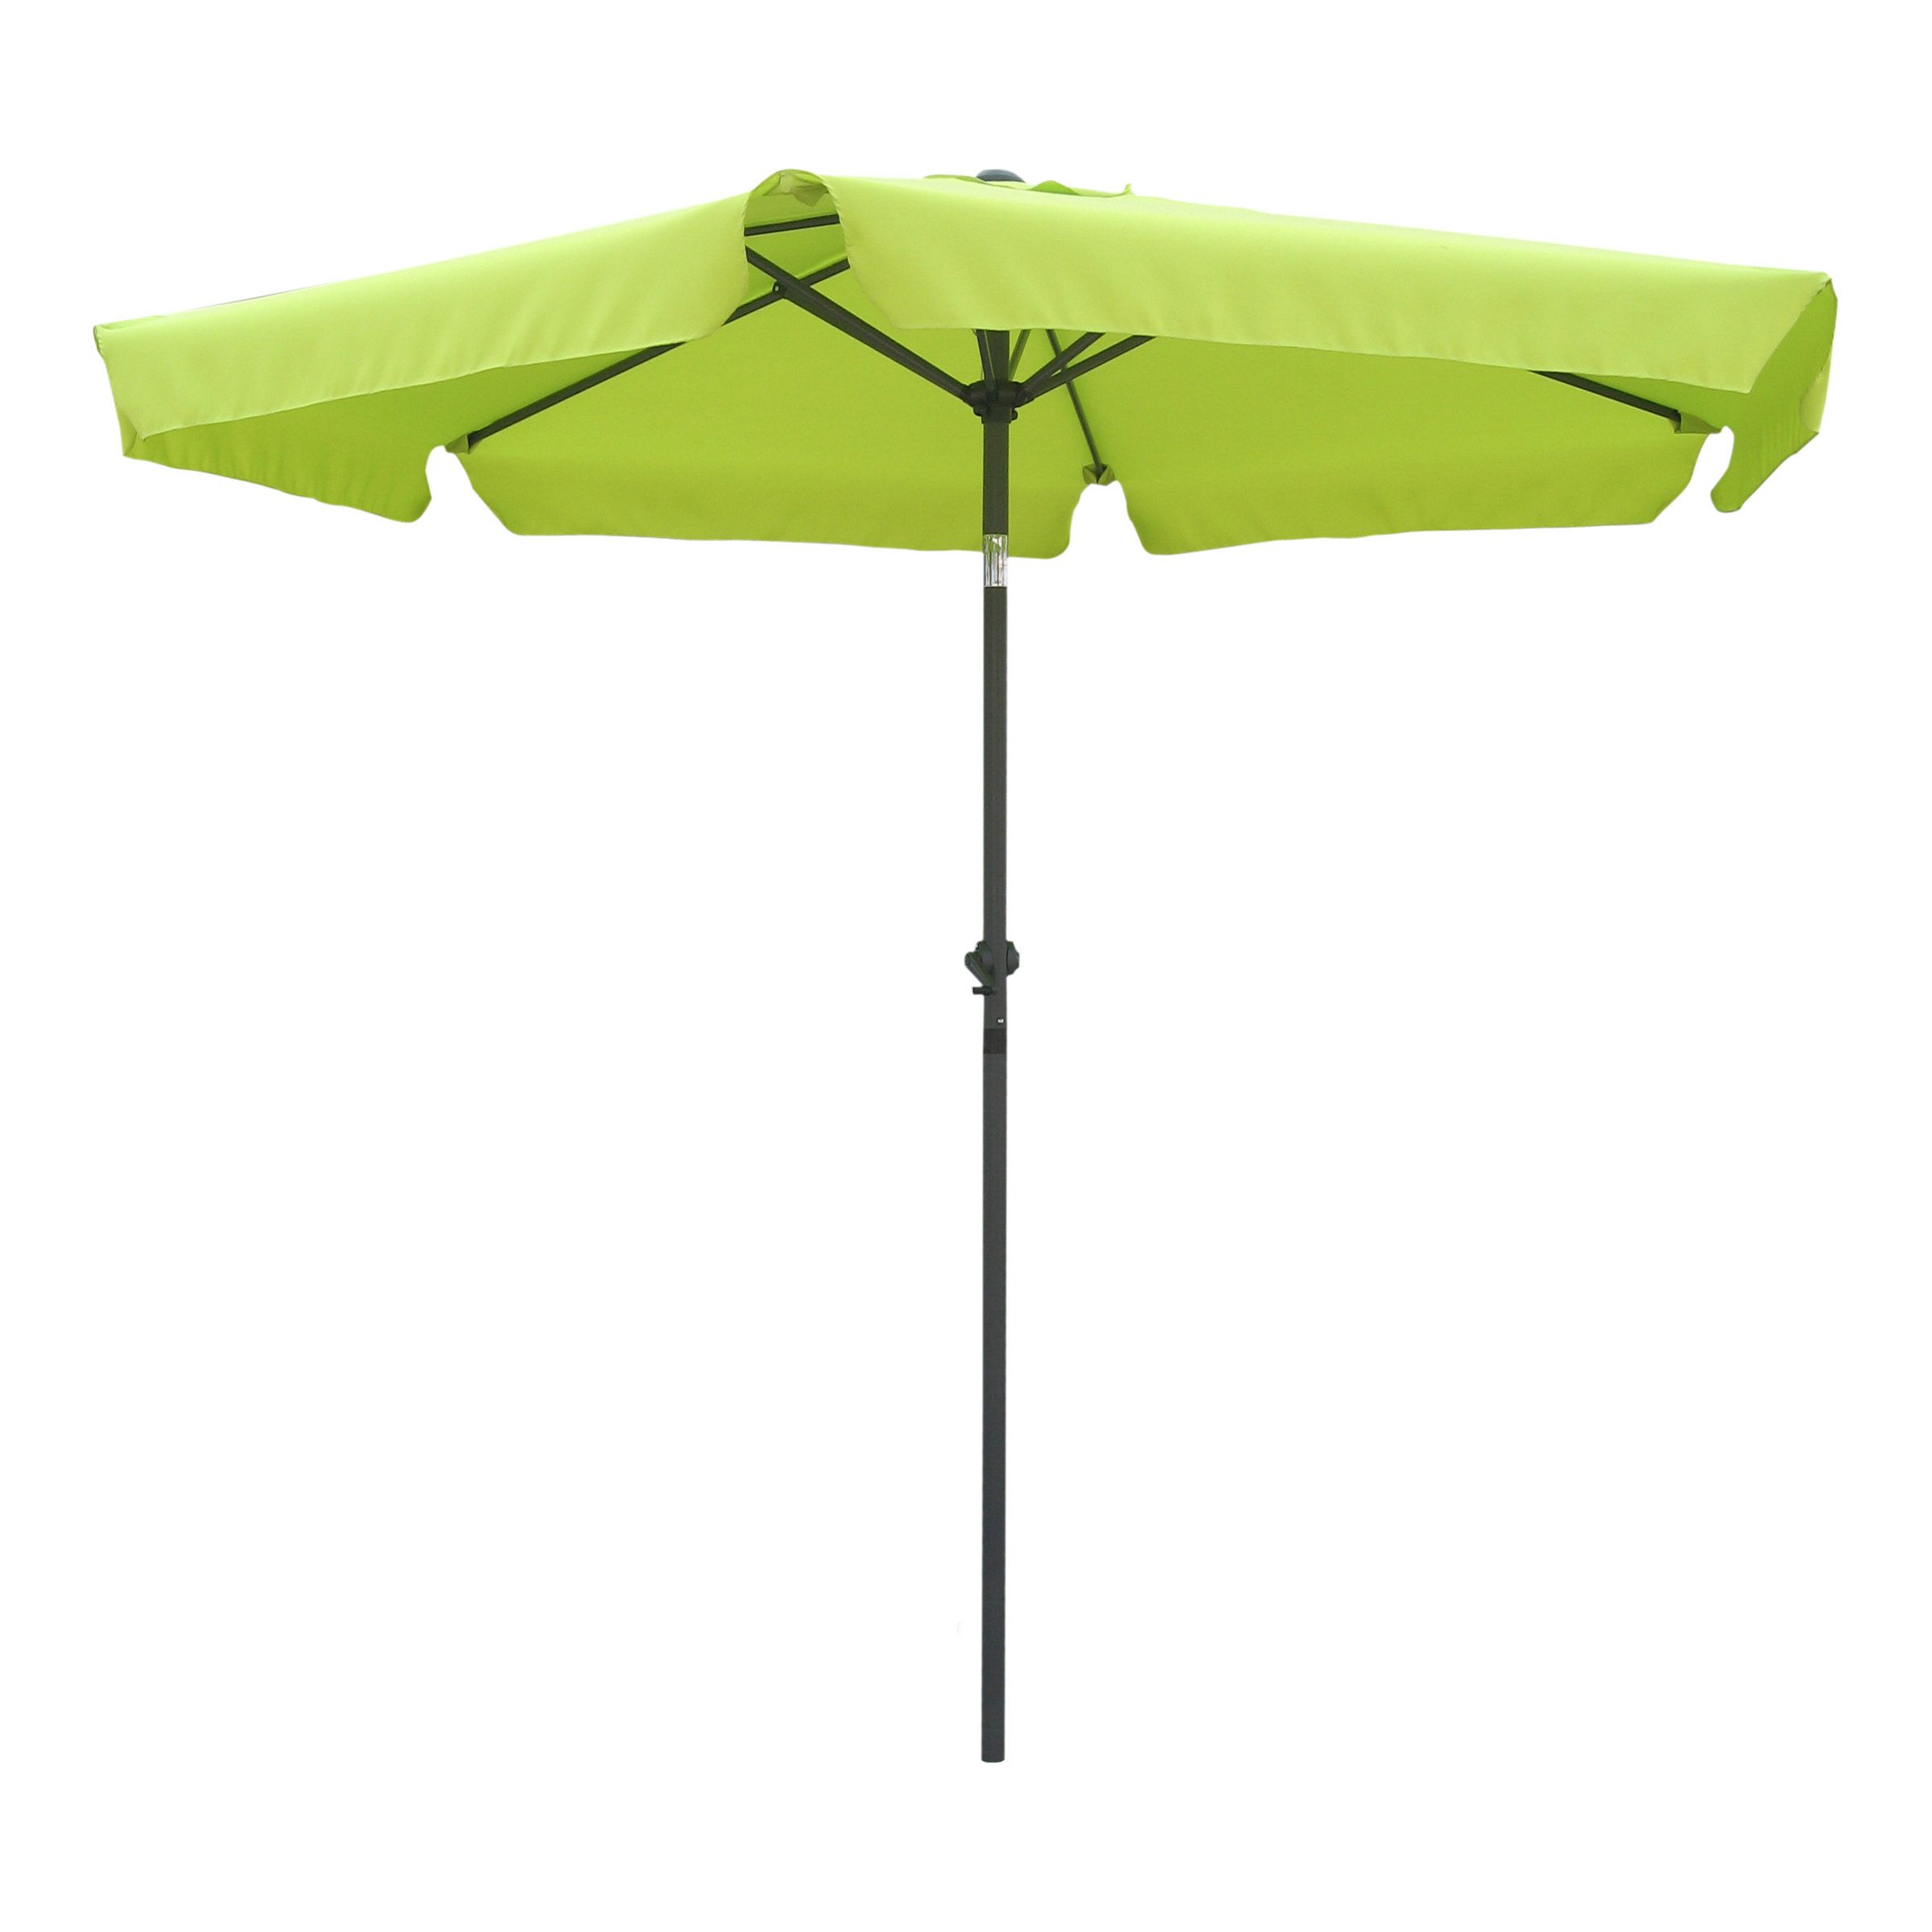 Hyperion 8' Beach Umbrella With Well Known Hyperion Beach Umbrellas (View 1 of 20)